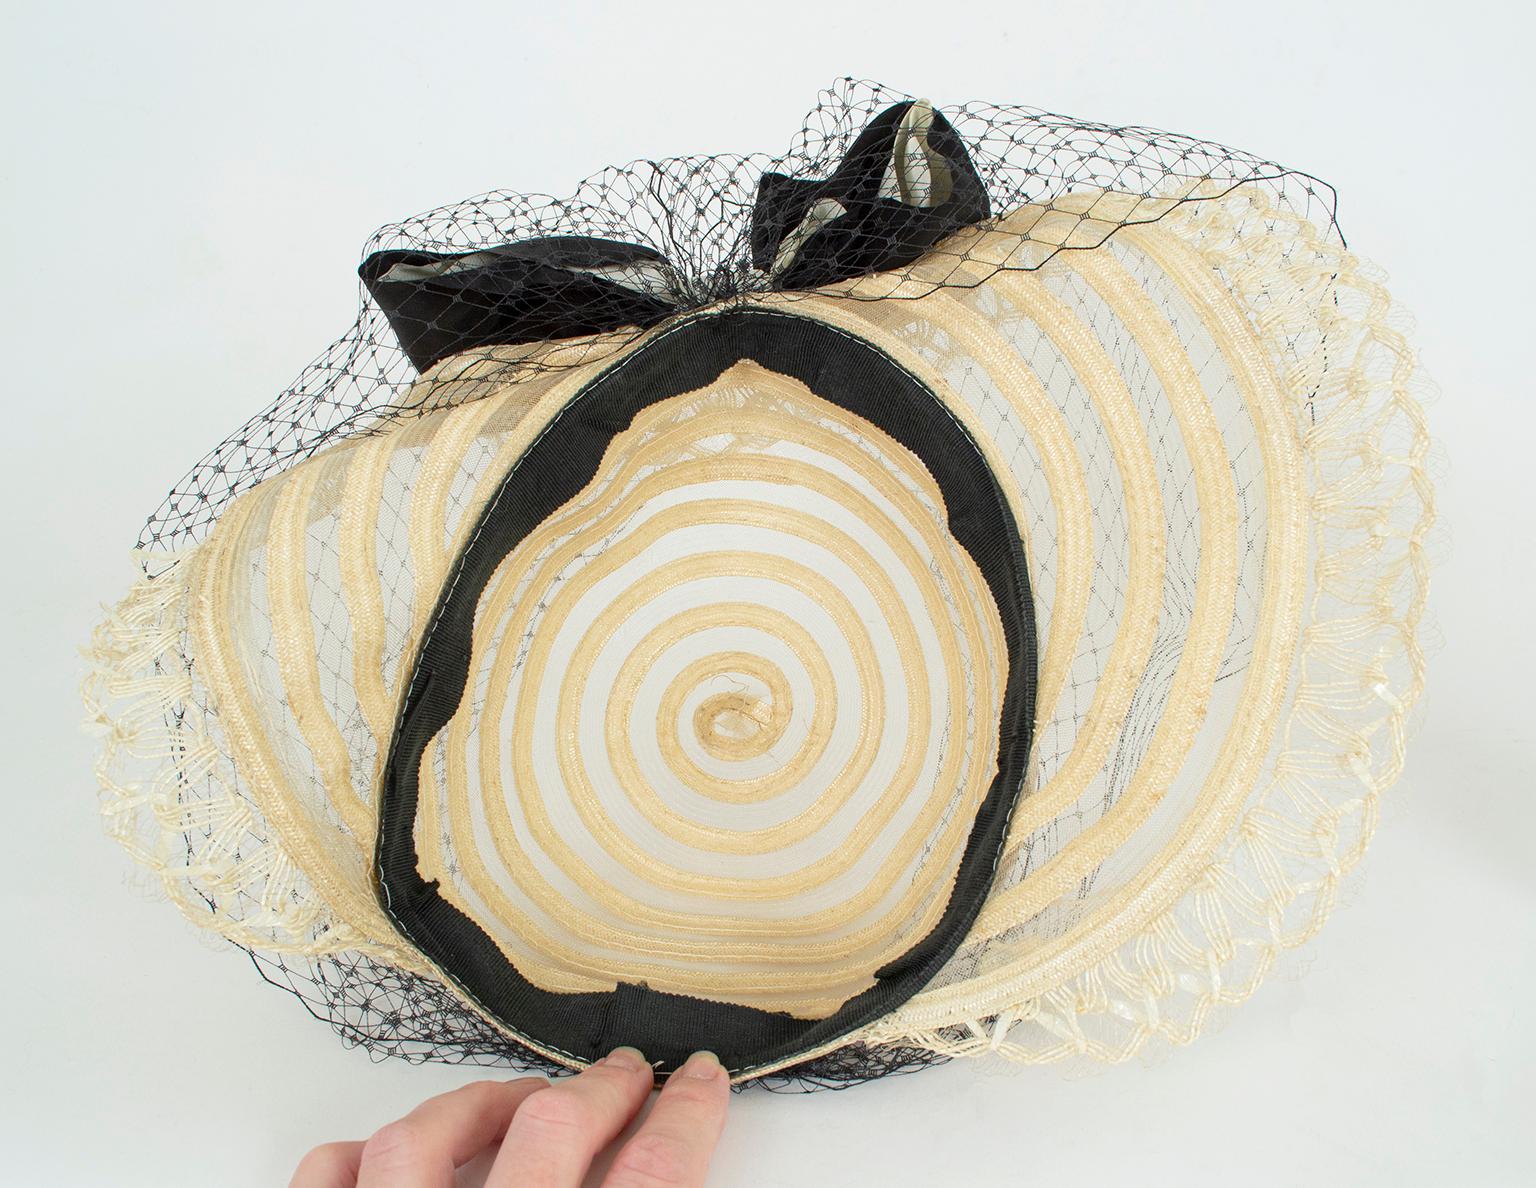 Transparent Ivory Ribbon and Mesh Gatsby Bonnet Hat w Caged Veil Bow – M, 1930s 5